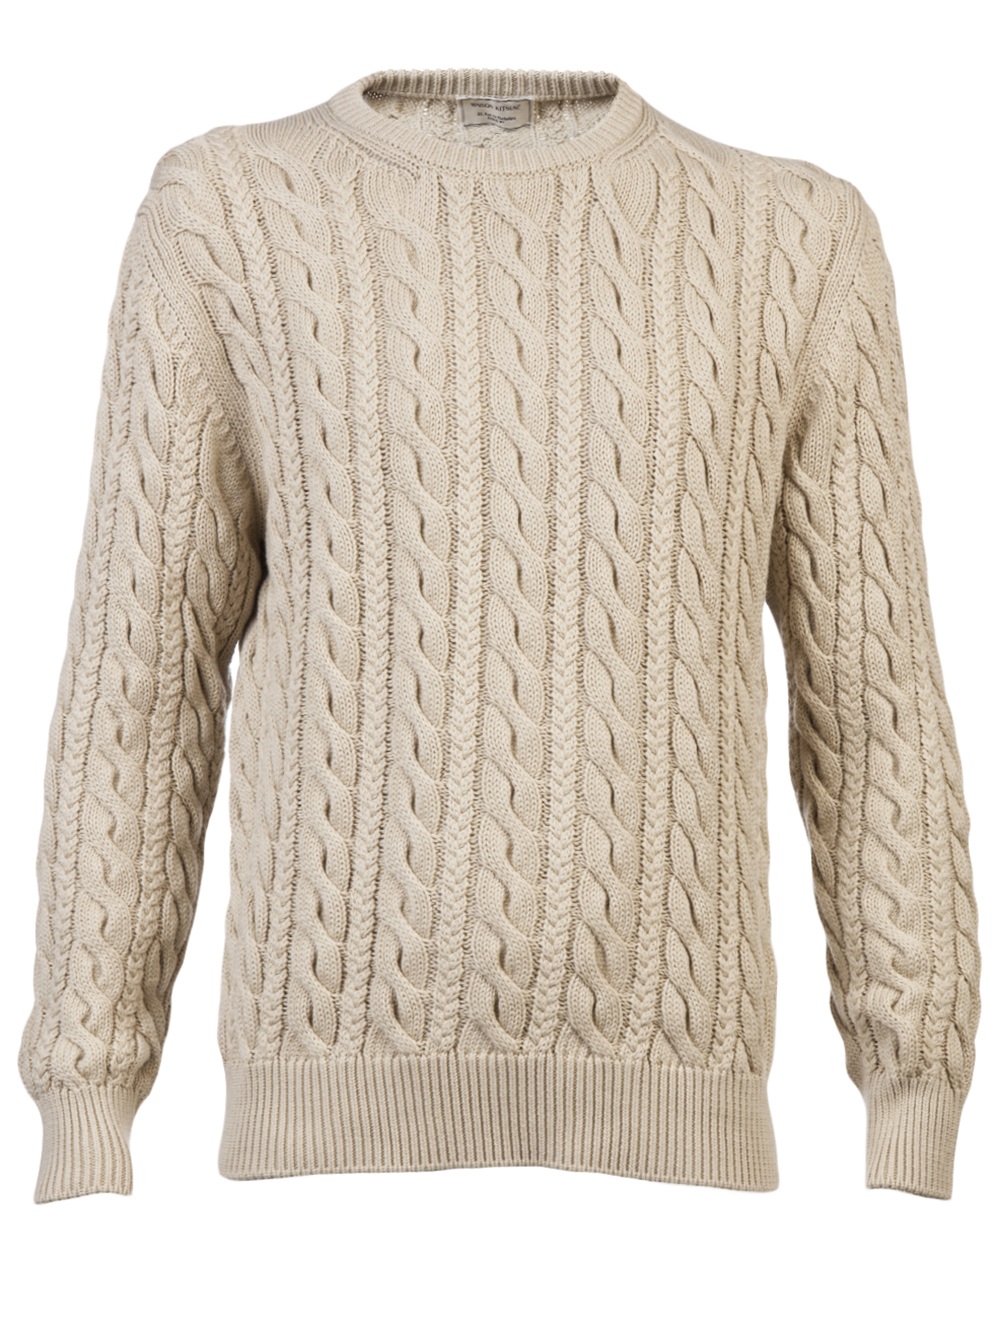 Maison Kitsuné Cable Knit Sweater in Natural for Men | Lyst